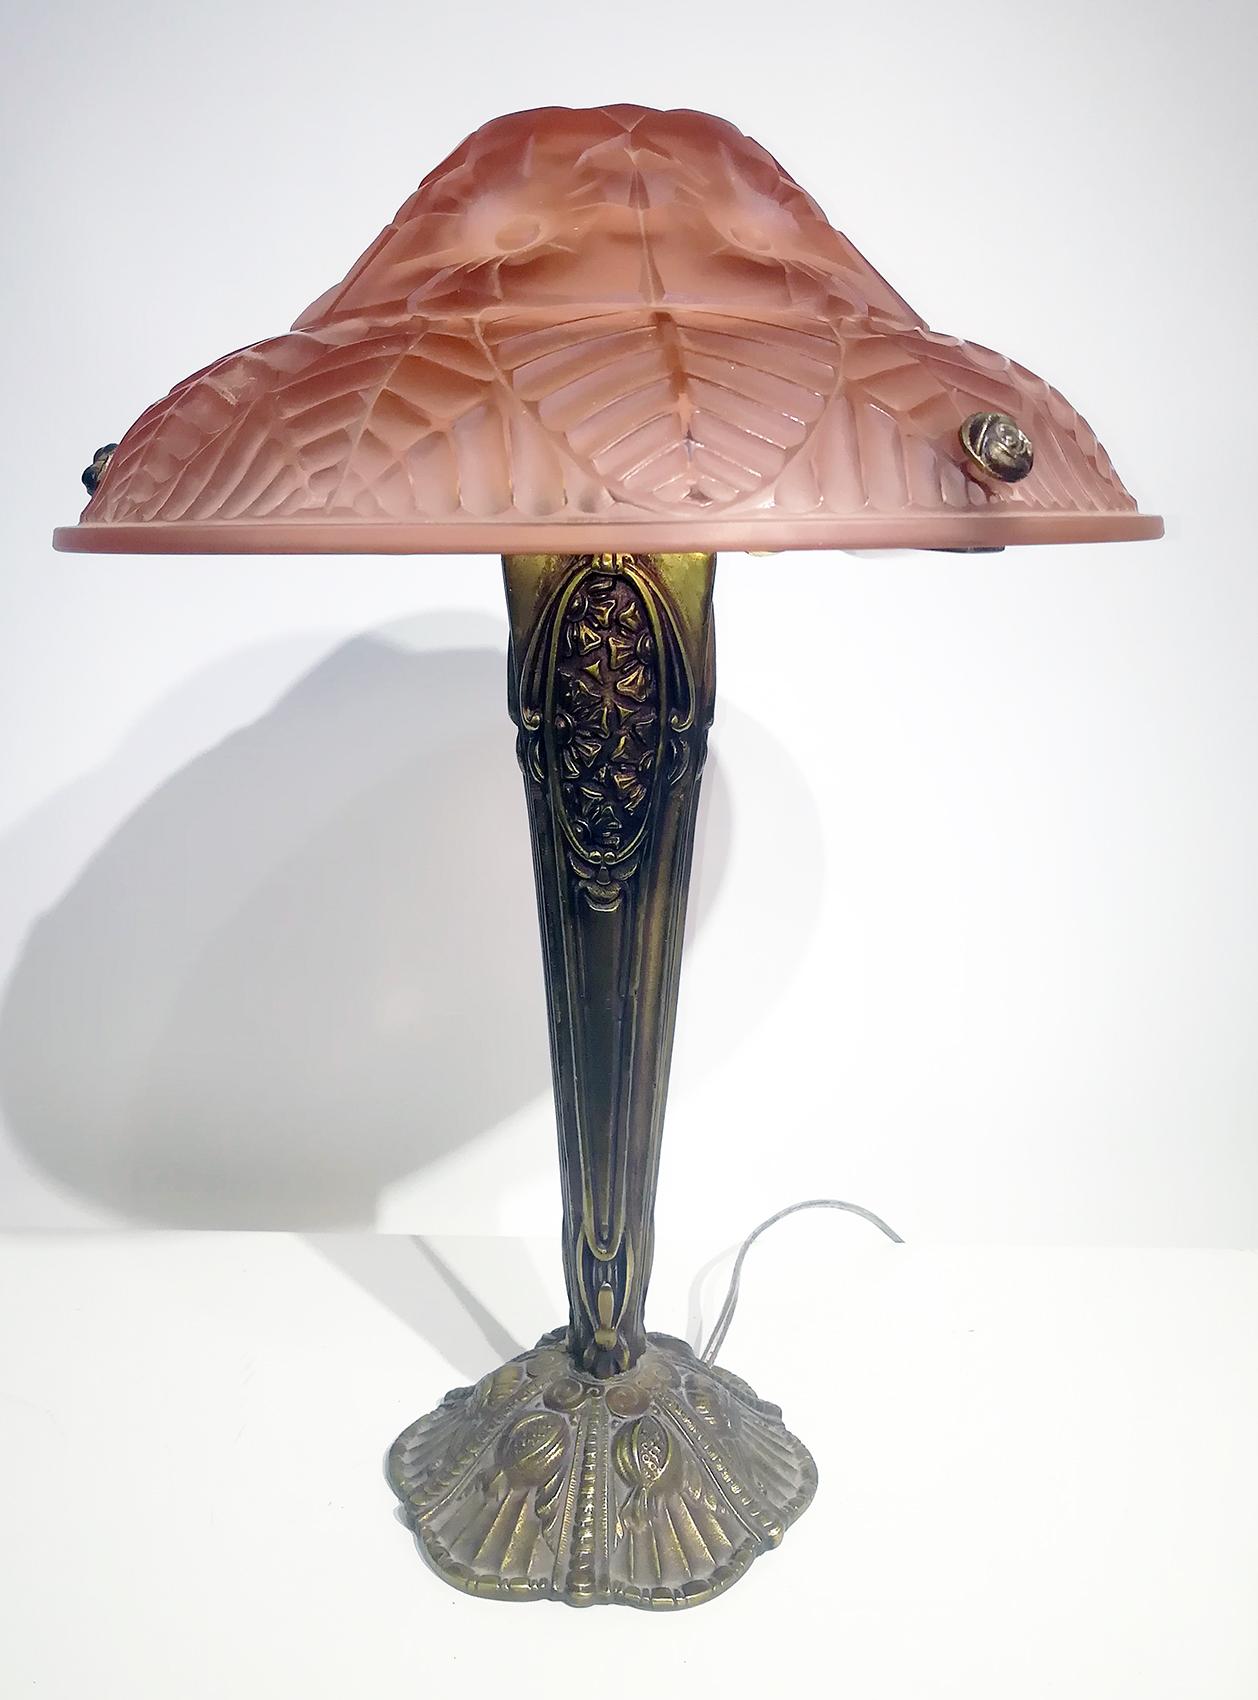 Charming pair of Art Deco table lamps, high quality molded glass panel (diameter: 35 cm ), hat shaped in grenadine color with original floral and leaves motif design signed “Ranc Freres”, resting on a bronze column with detailed floral